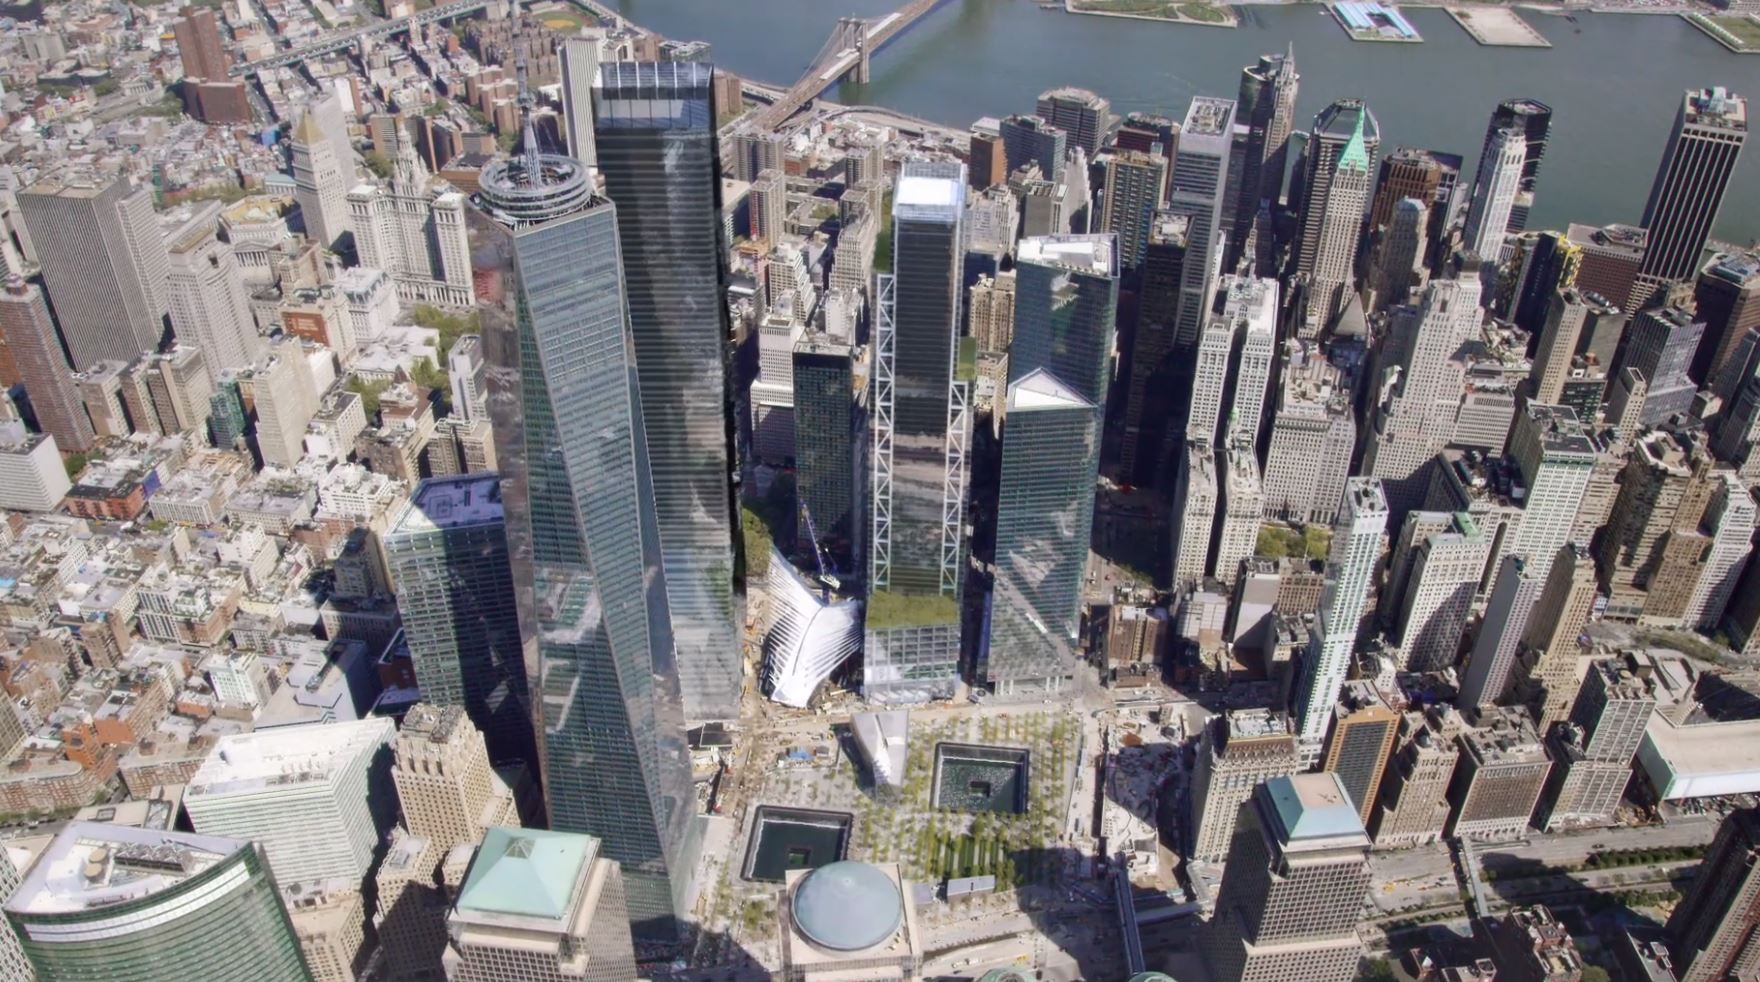 Dawn of a new Downtown: The transformation of Lower Manhattan since 9/11